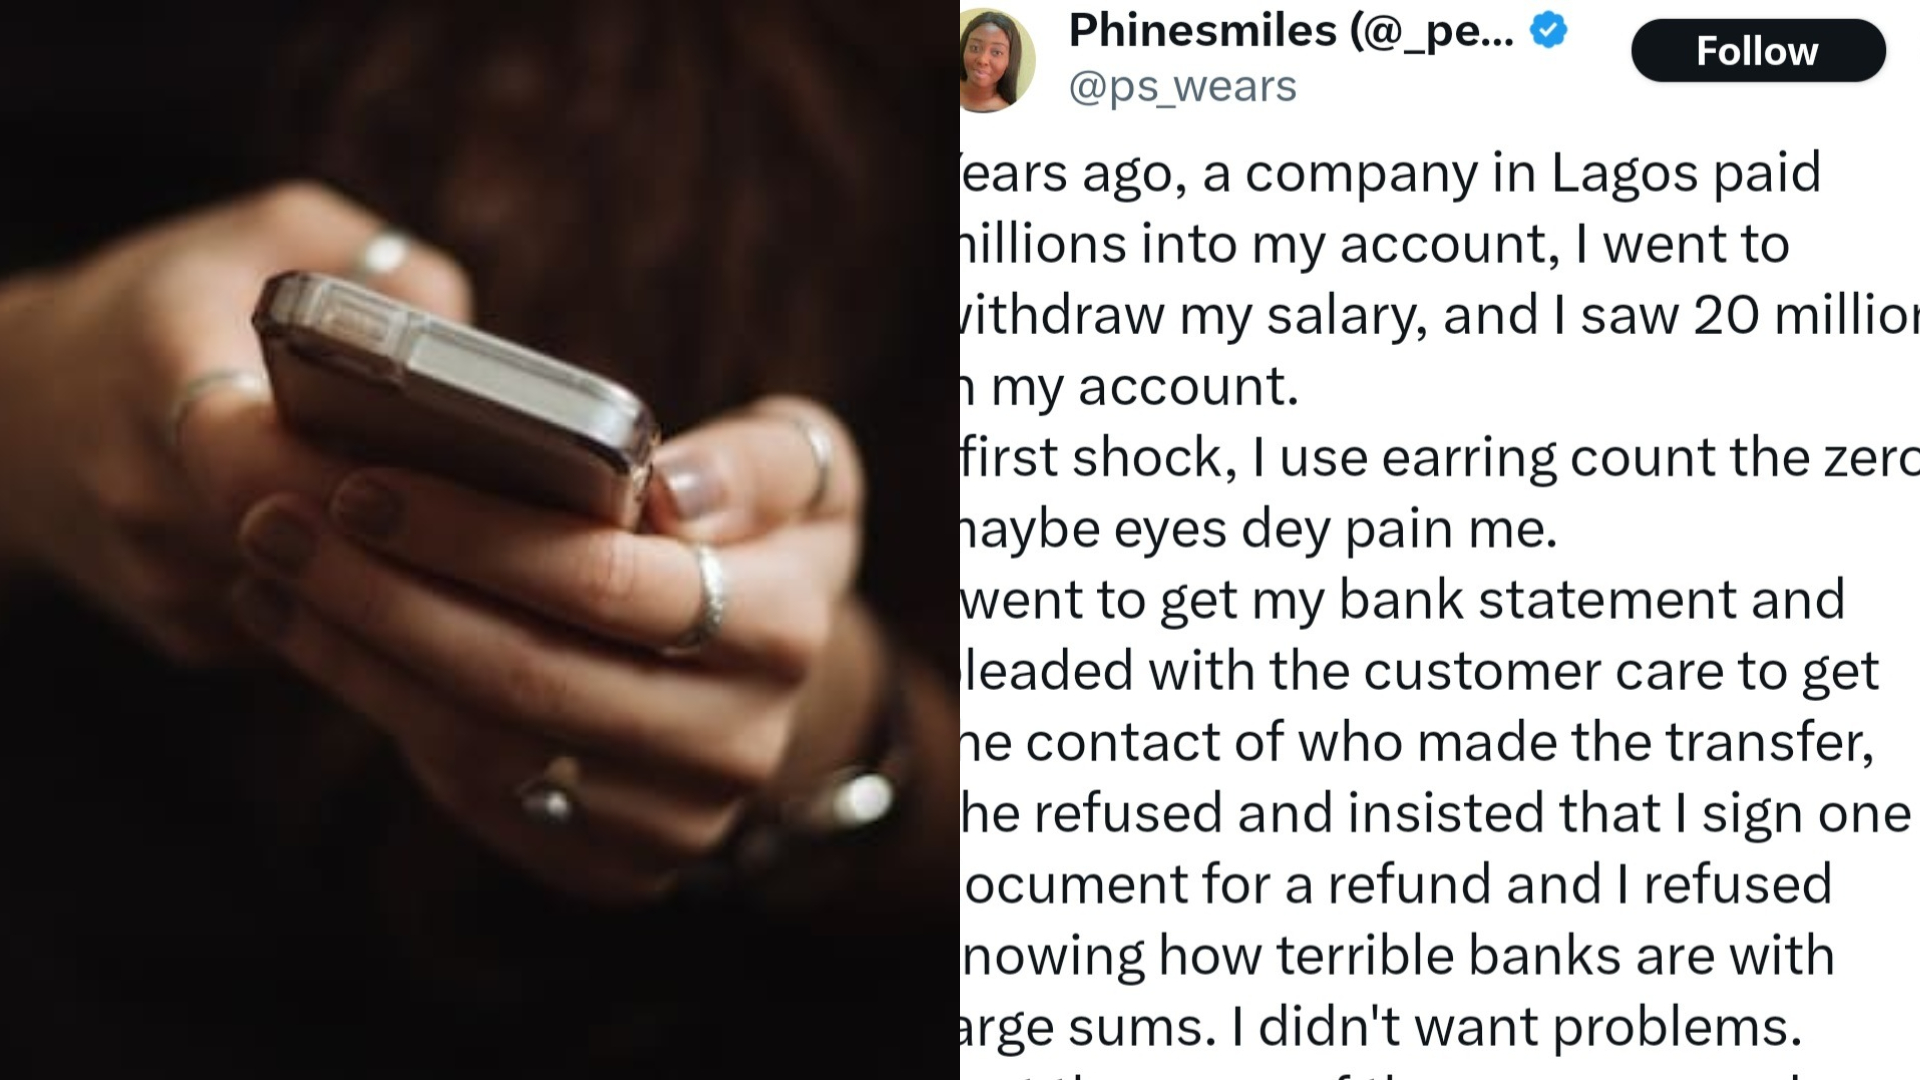 A businesswoman has detailed what she did when her account was accidentally credited with N20 million by the corporation.